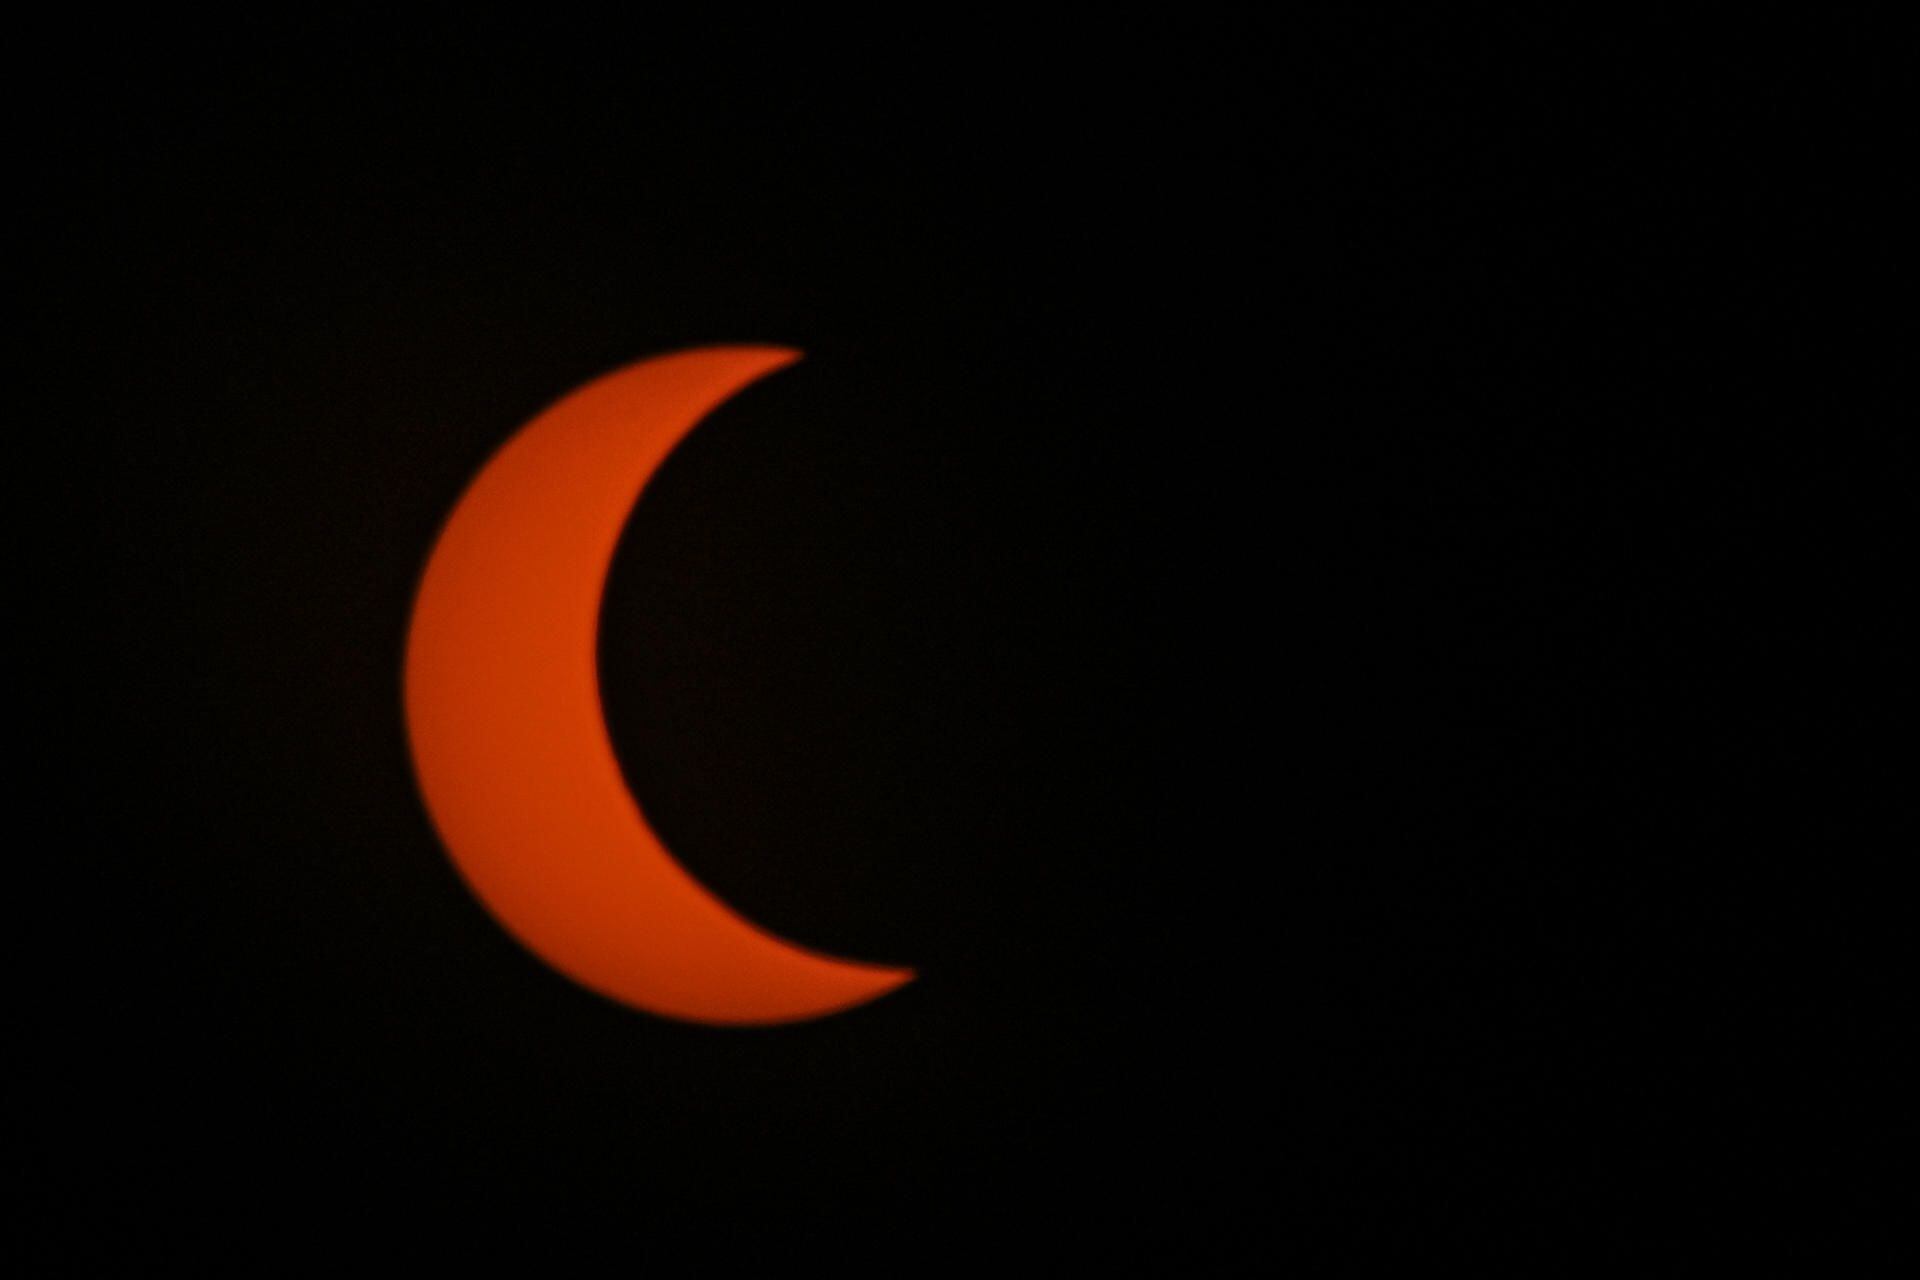 The eclipse can be seen between 10:42 am and 3:52 pm (Peruvian time) in North America. 